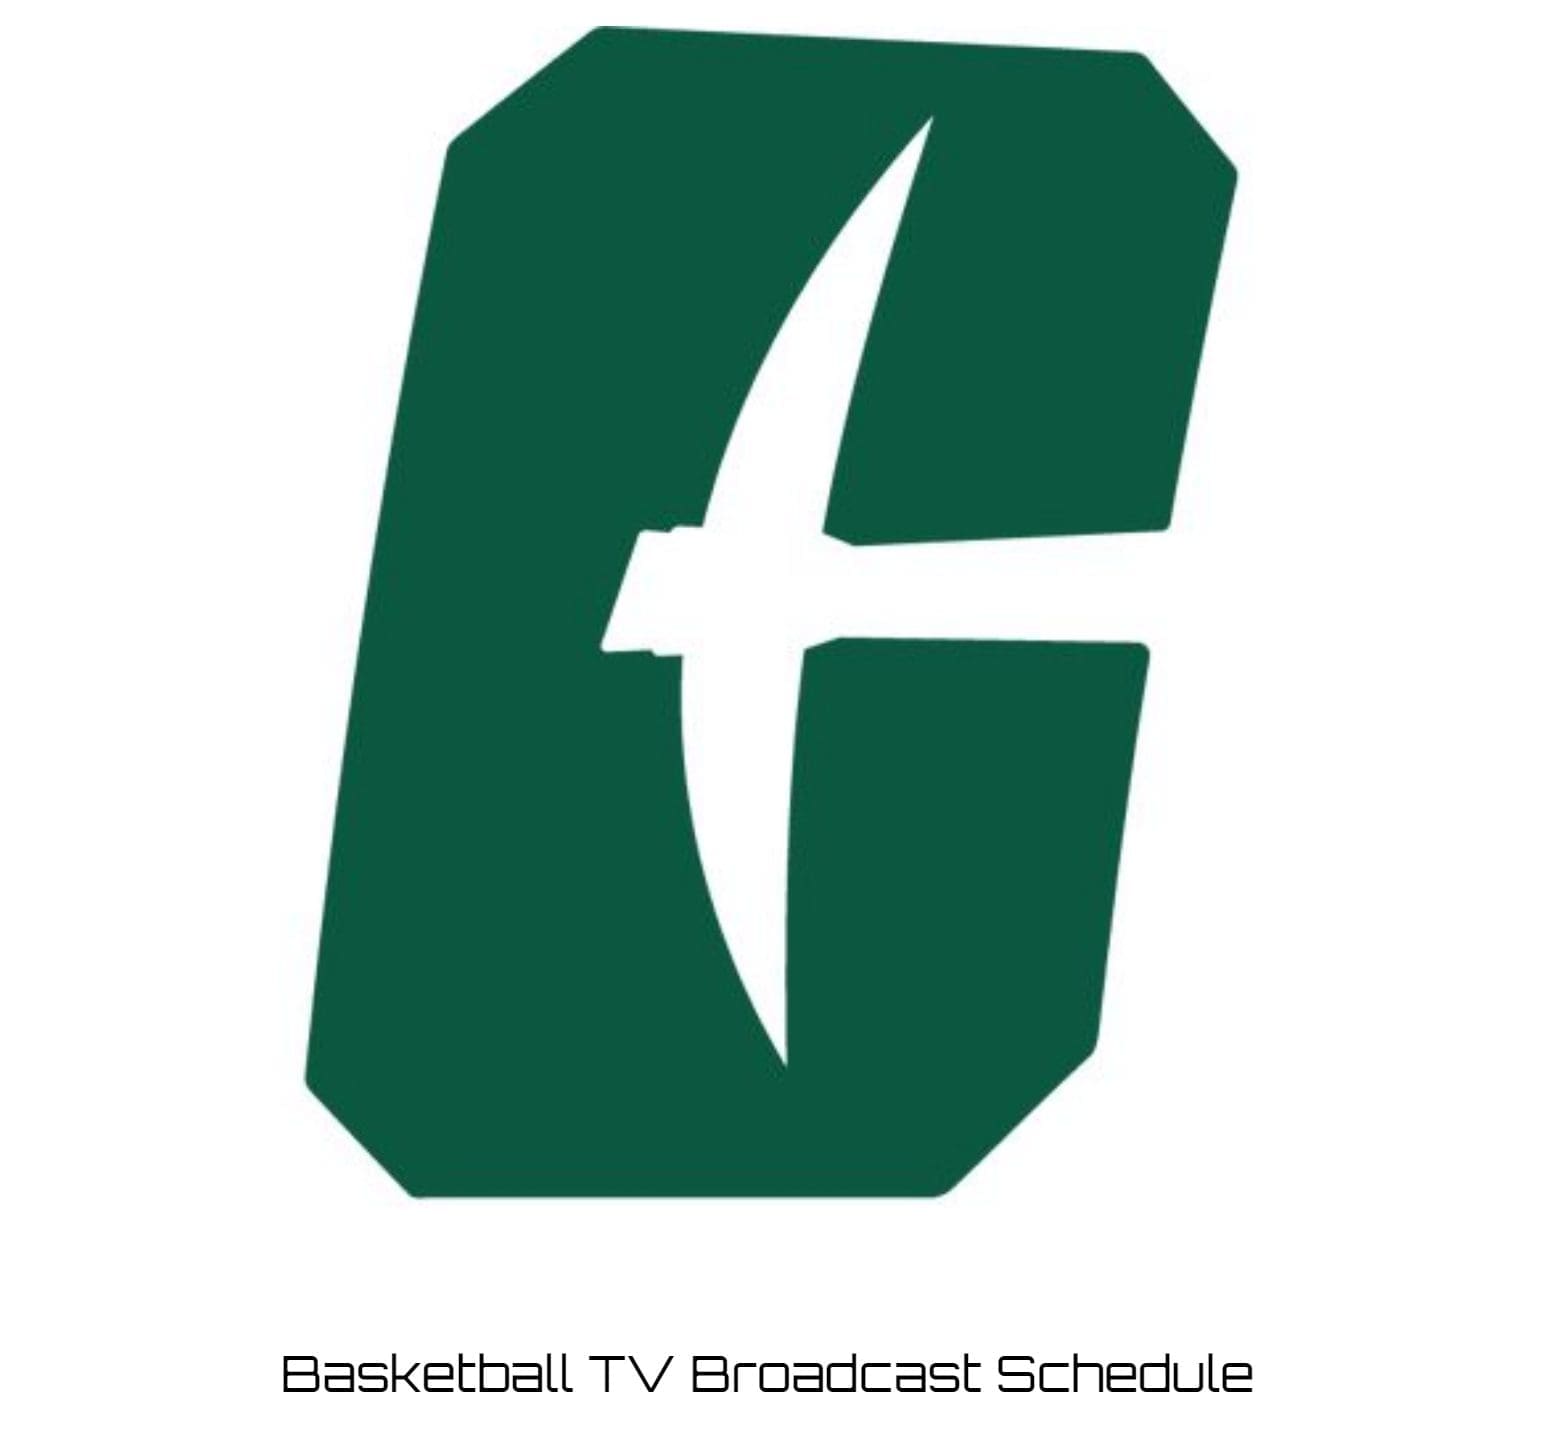 Charlotte 49ers Basketball TV Broadcast Schedule